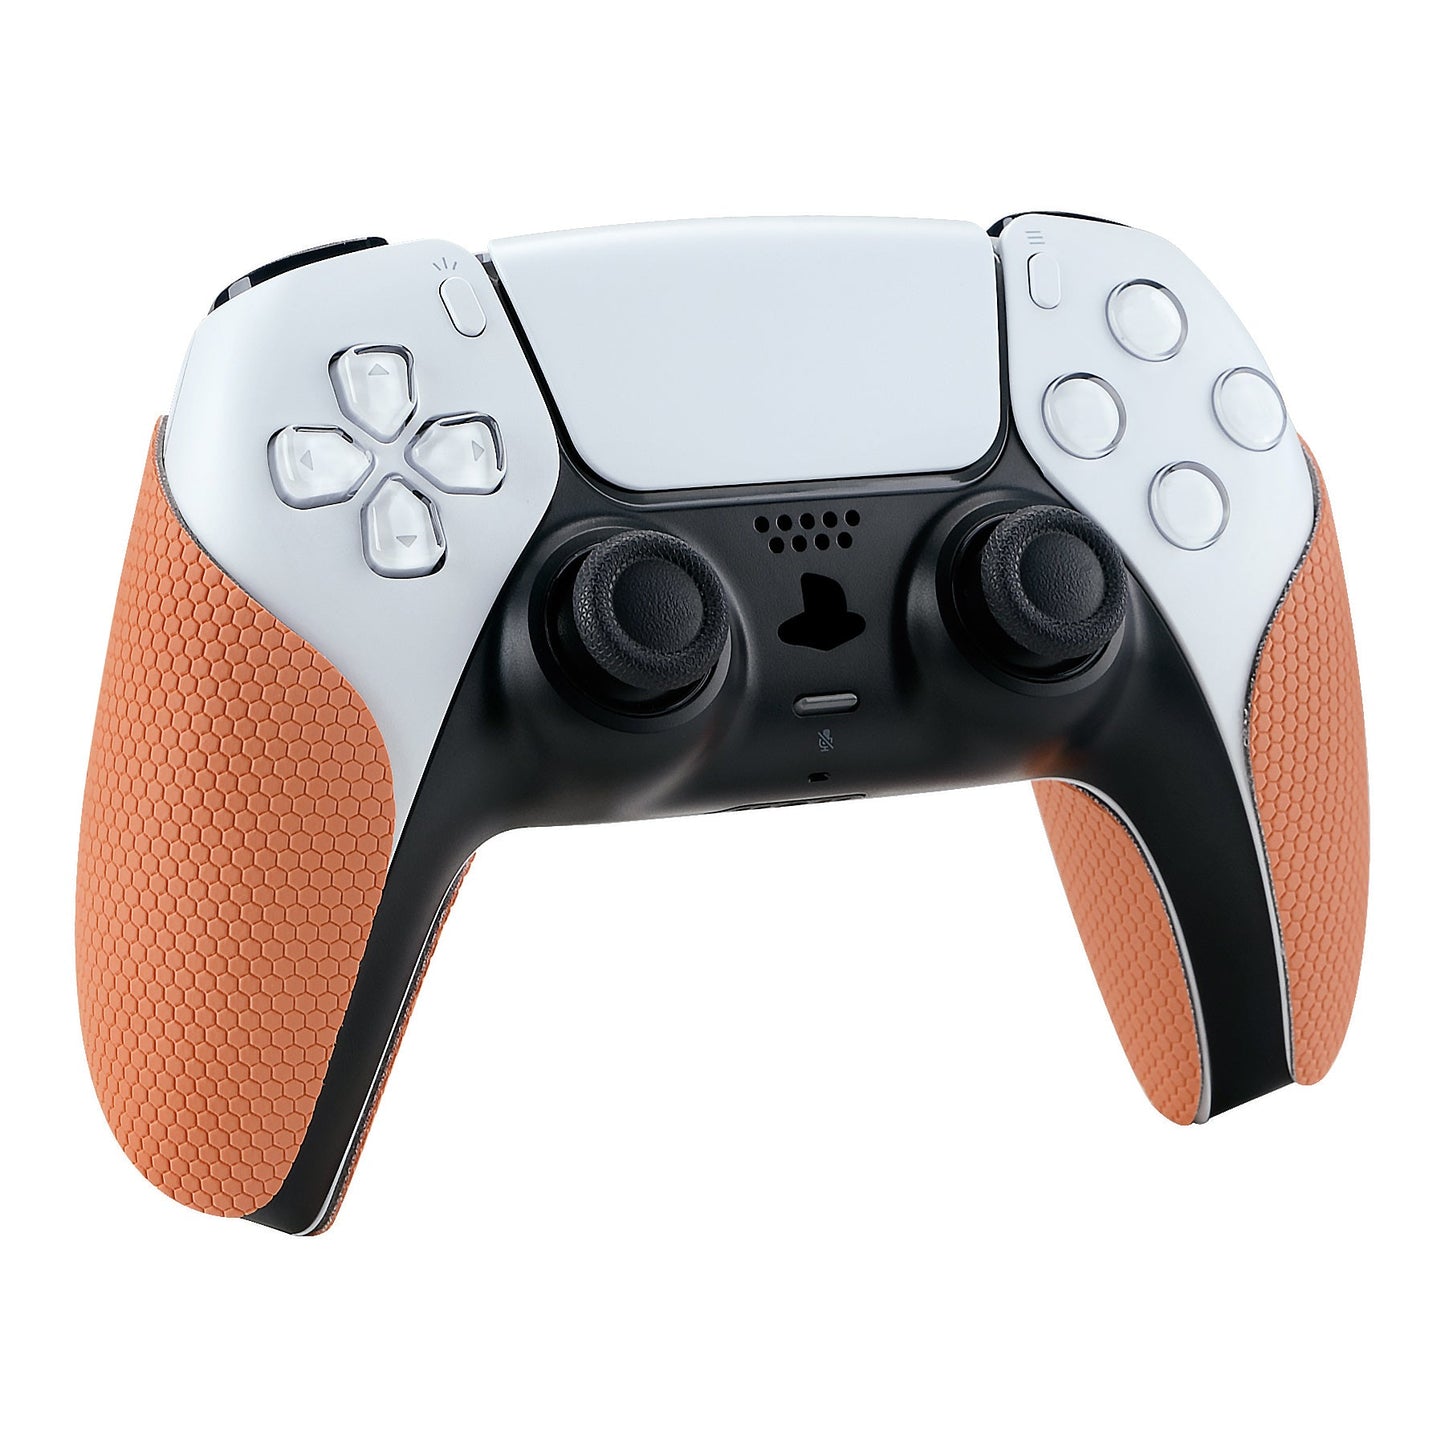 PlayVital Coral Anti-Skid Sweat-Absorbent Controller Grip for PlayStation 5 Controller, Professional Textured Soft Rubber Pads Handle Grips for PS5 Controller - PFPJ024 PlayVital